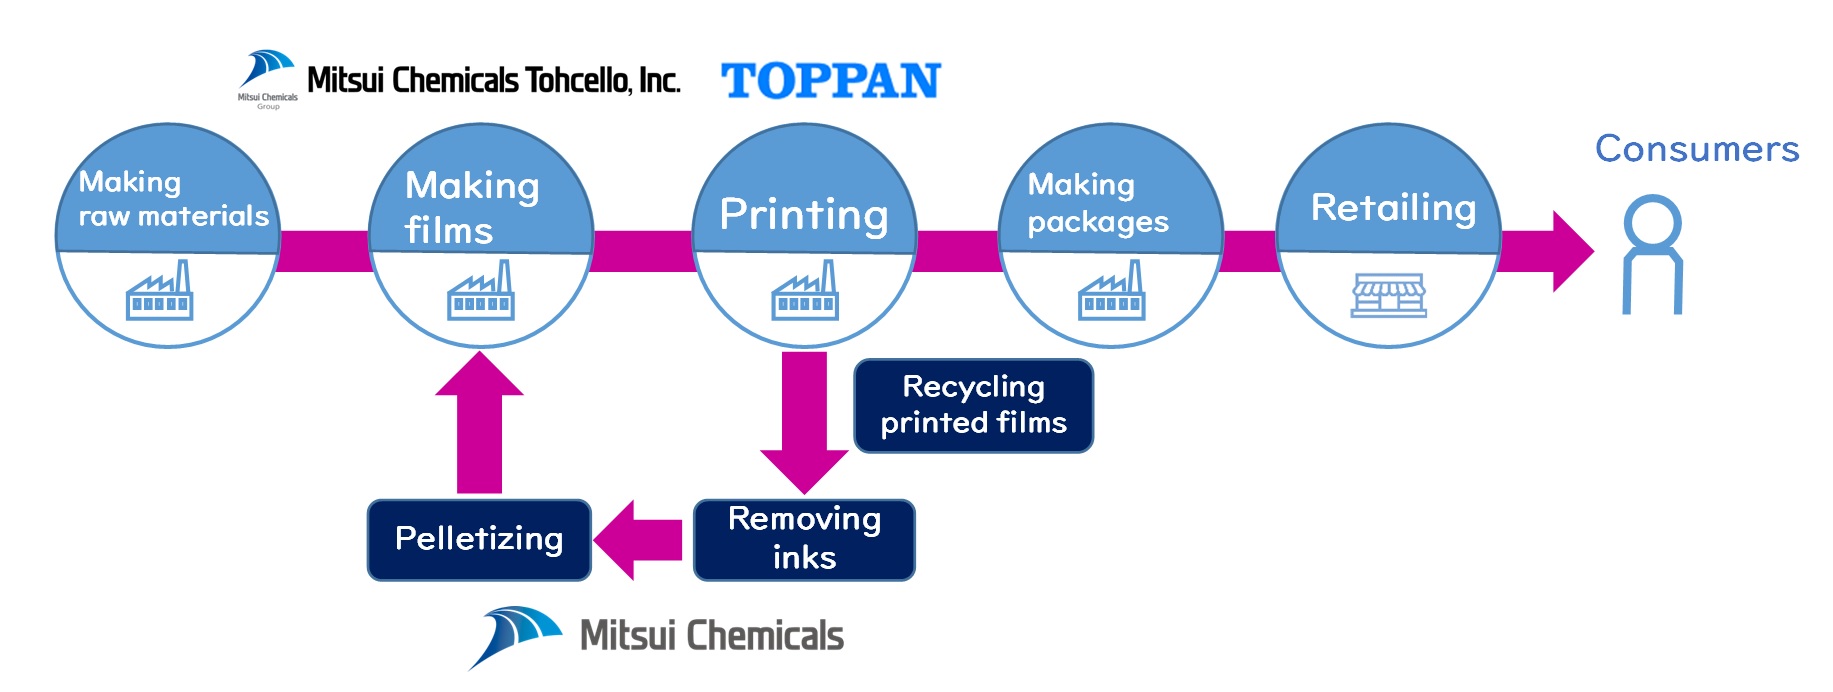 Joint Pilot Testing Launches for Horizontal Recycling of Flexible Packaging Film